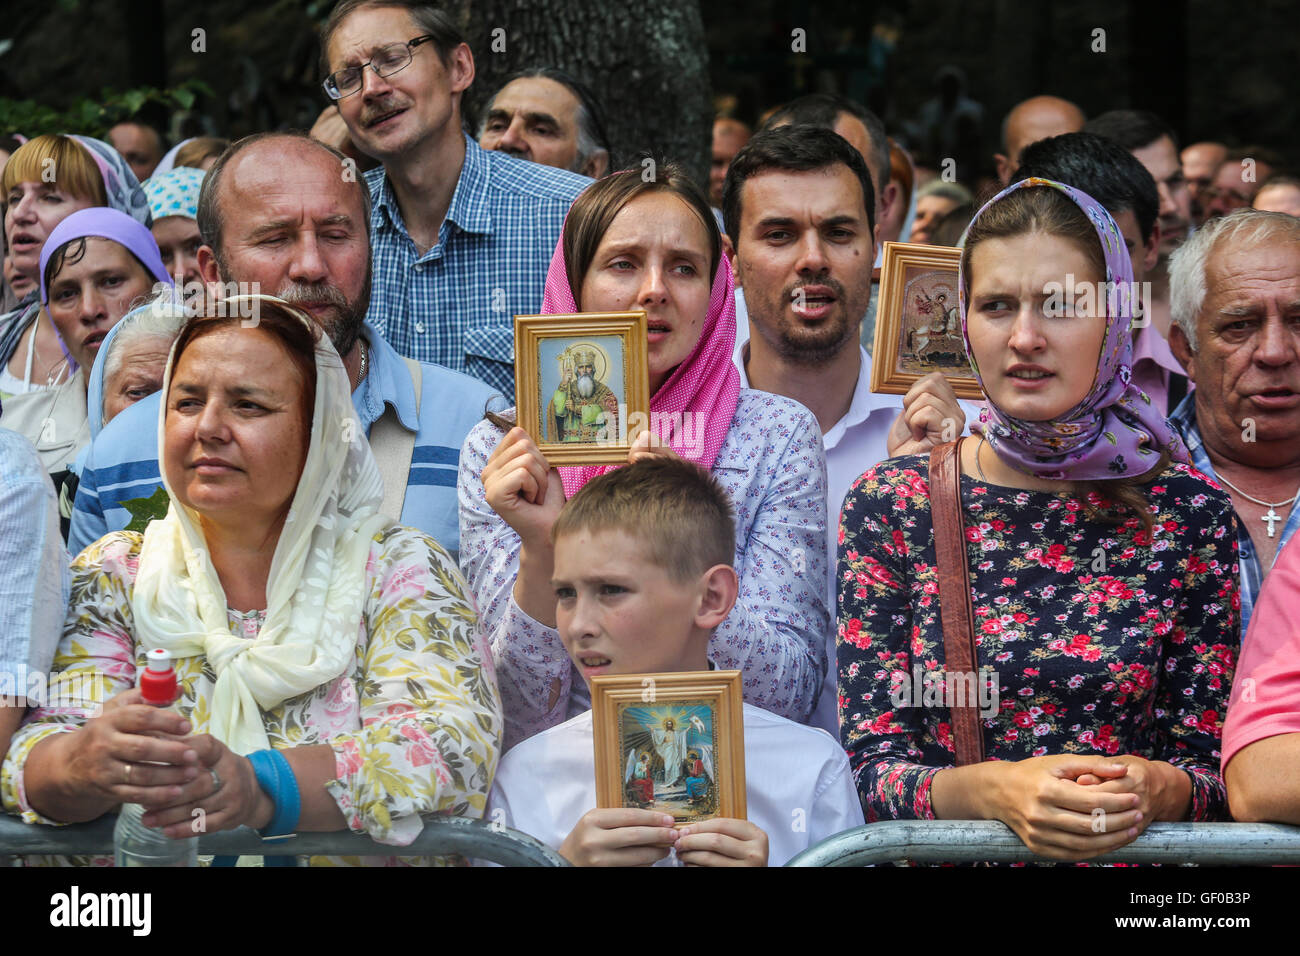 Ukrainian orthodox believers, priests, monks attend a religion march organized by the Ukrainian Orthodox Church of the Moscow Patriarchate in Kyiv, Ukraine, 27 July 2016. Sacred processions of Moscow Patriarchate believers started earlier, in July 4 2016 and timed to the Day of the Christianization of Kyiv Rus and 1000 years of ancient monks on the Holy Mount Athos. On July 27 believers who have begun a course from Svyatogorsk Monastery in eastern Ukraine and from Pochayiv Monastery at the west of the country, met at the European Square in Kyiv. The main celebrations took place at Vladimir's Stock Photo